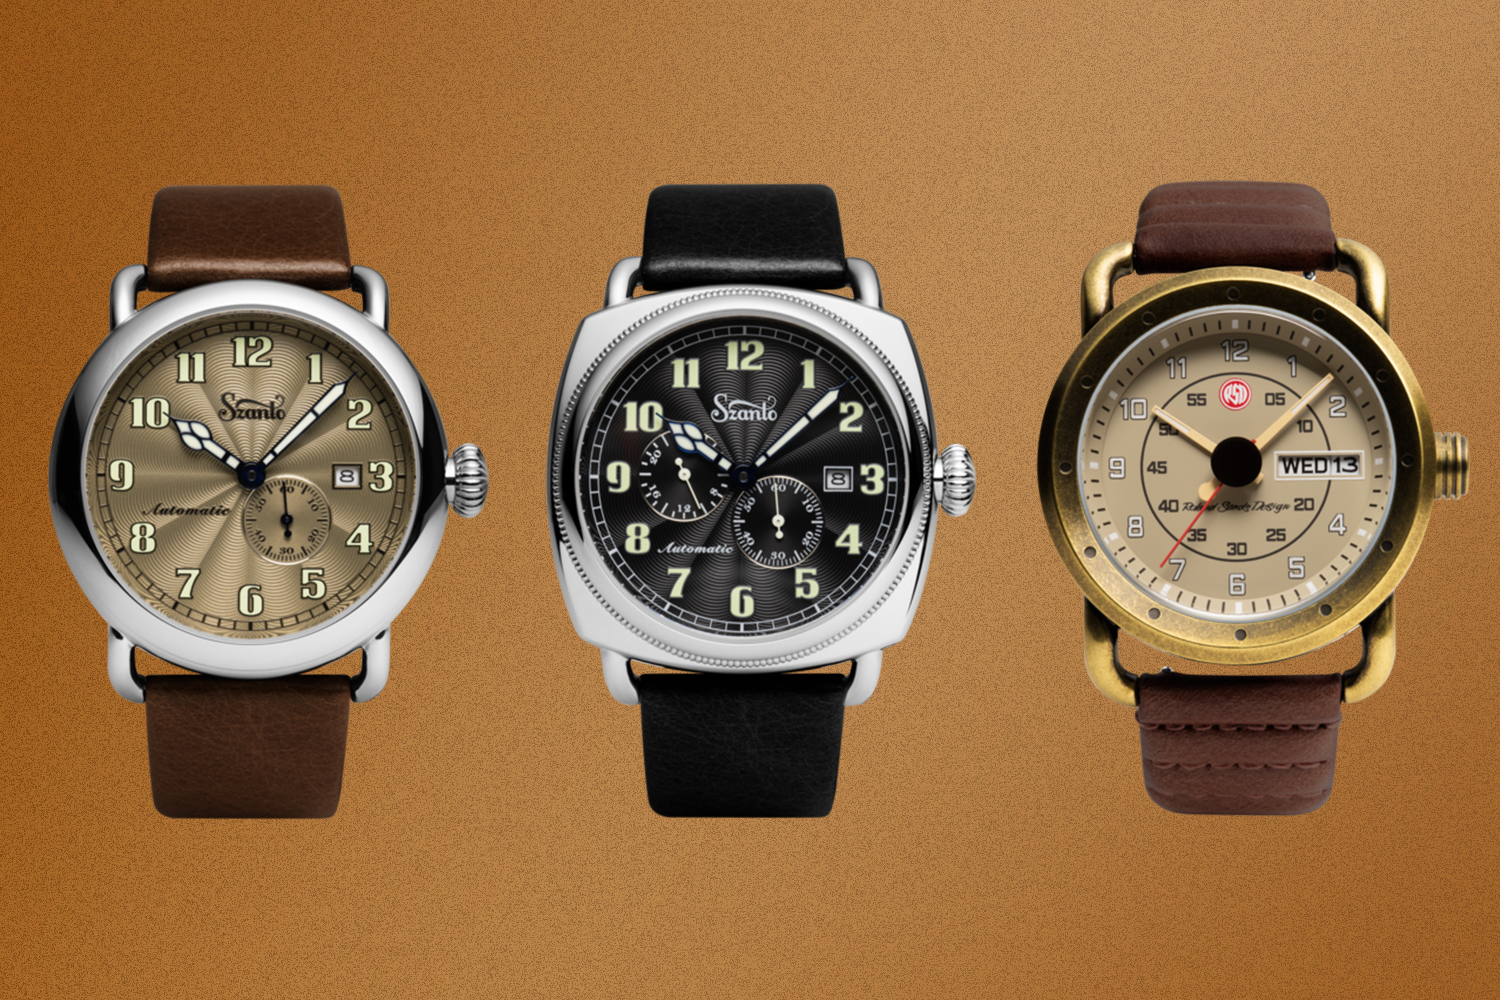 Three Szanto watches on a rust background